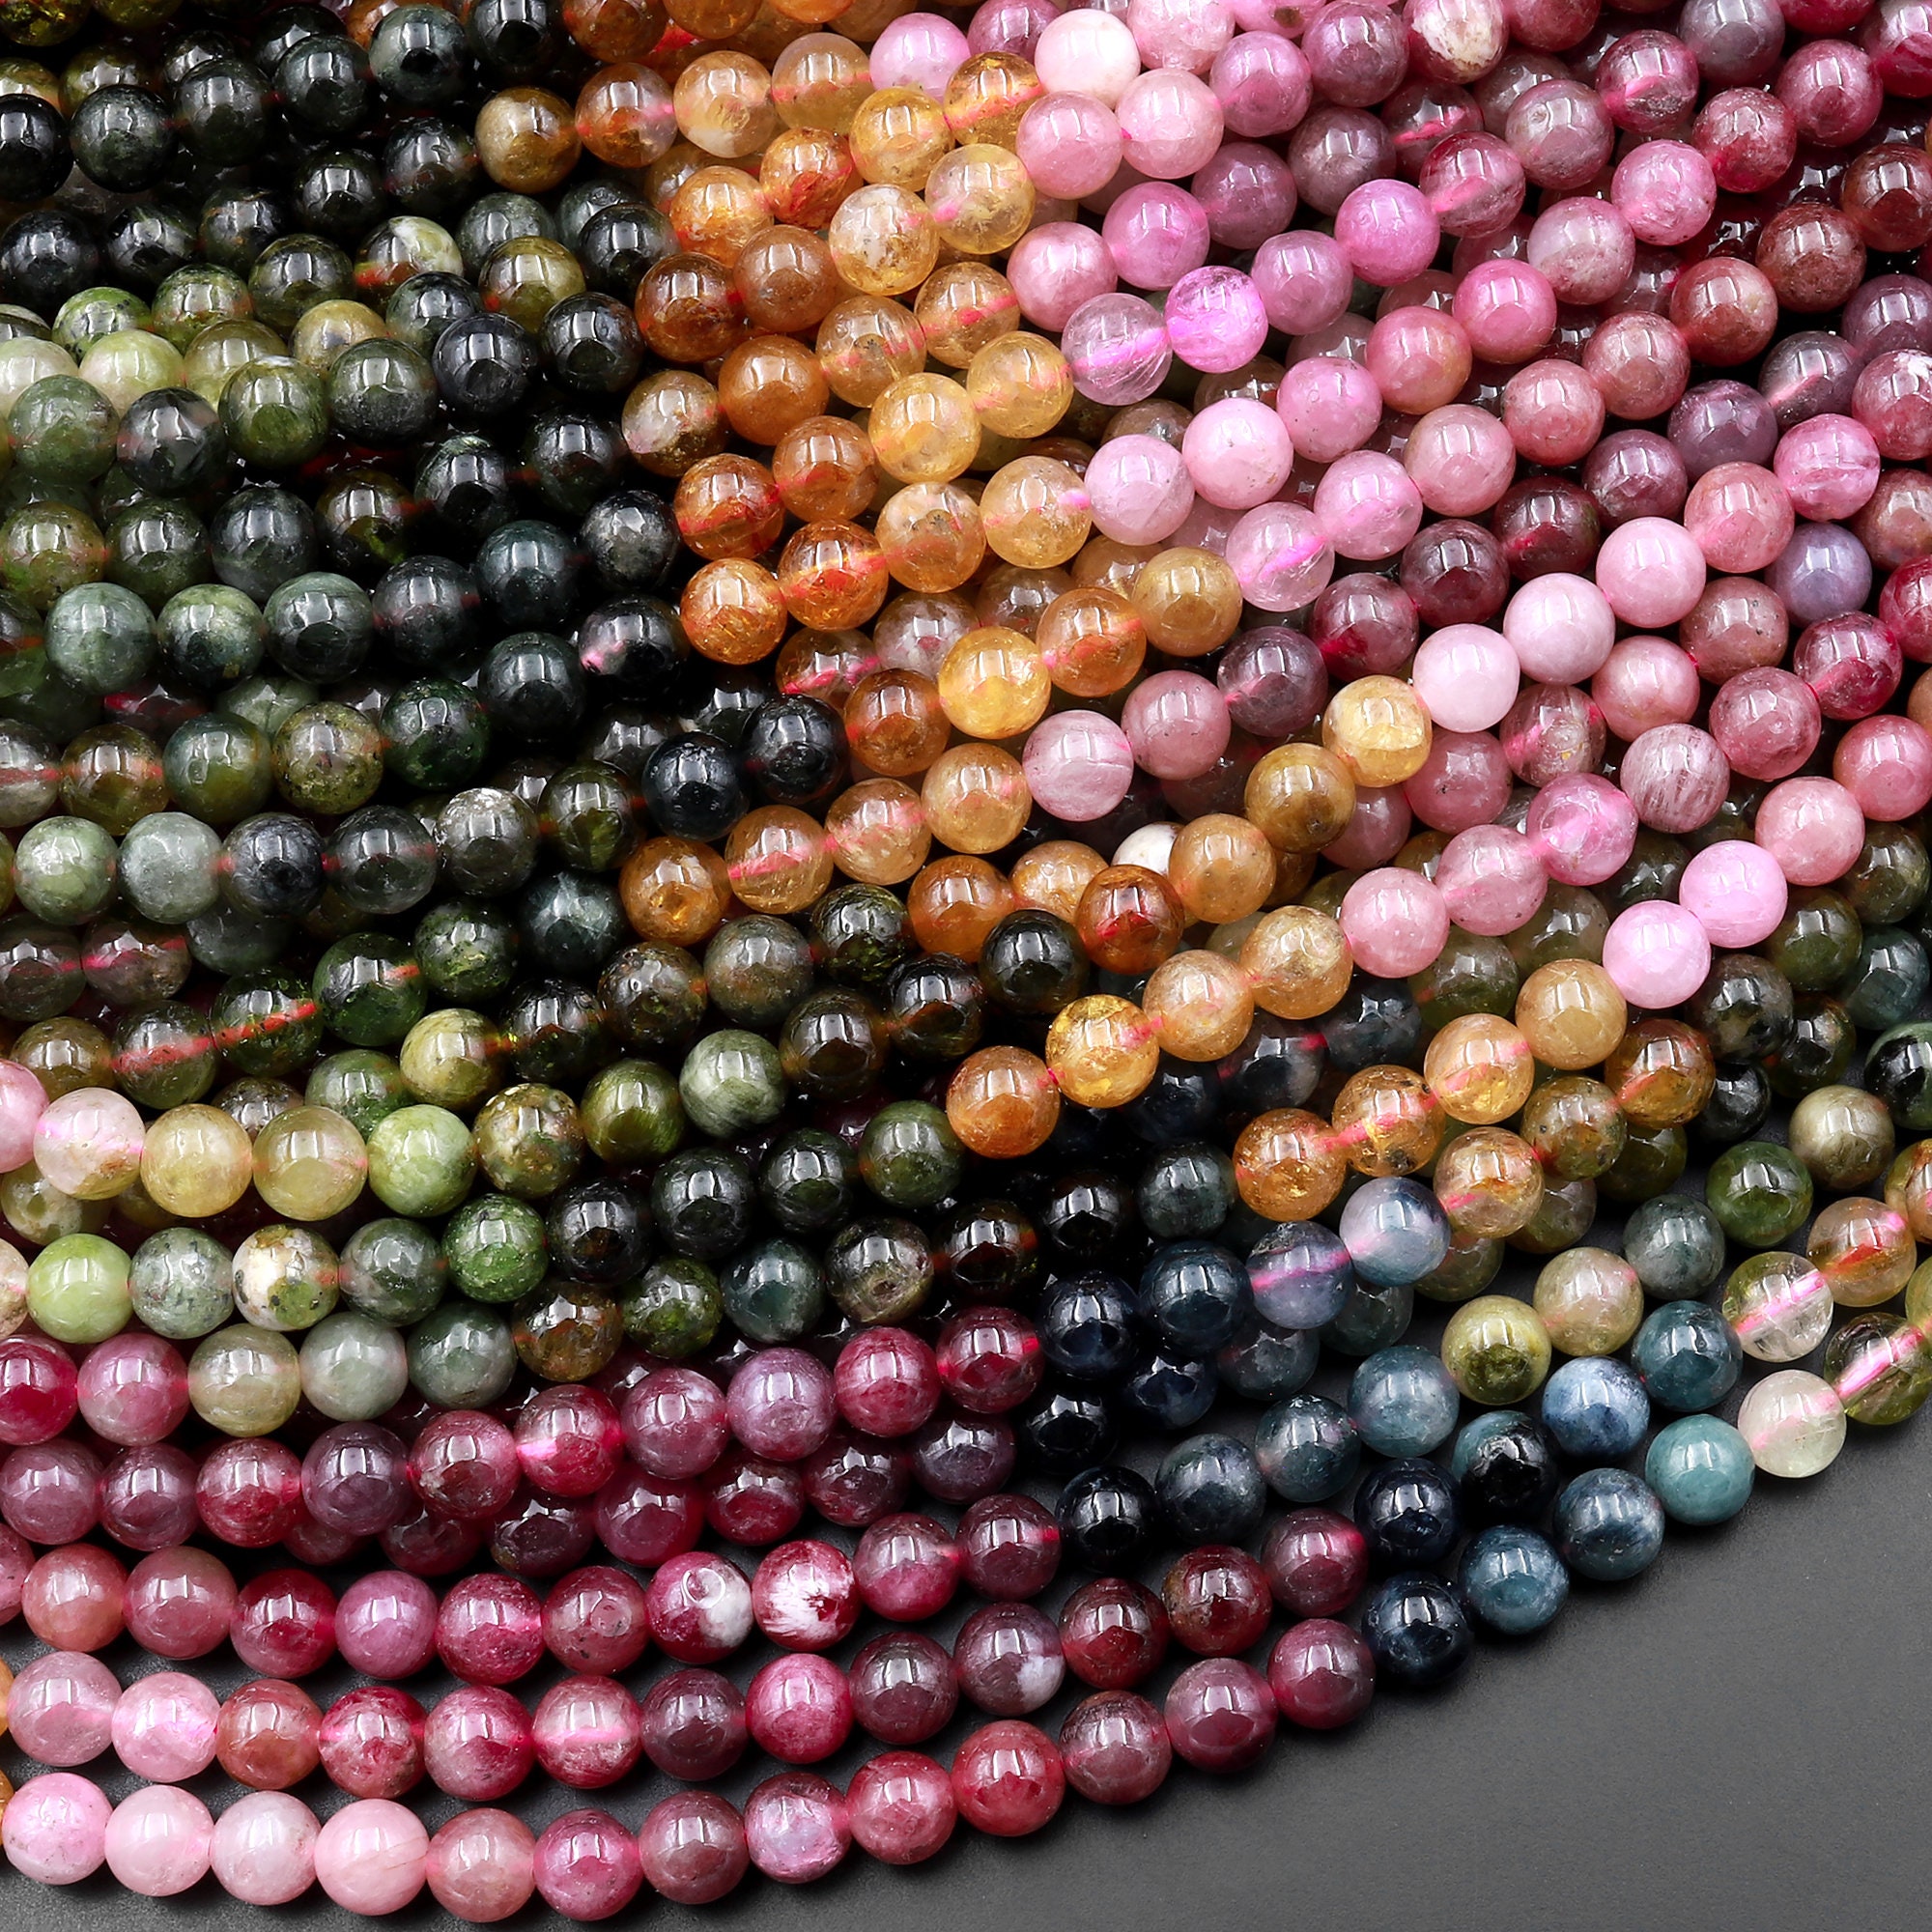 Rainbow 8mm Smooth Gemstone Rondelles With 1mm Hole for Size 8 Griffin  Silk, Colorful Gemstone Beads, Rainbow Gemstone Beads 